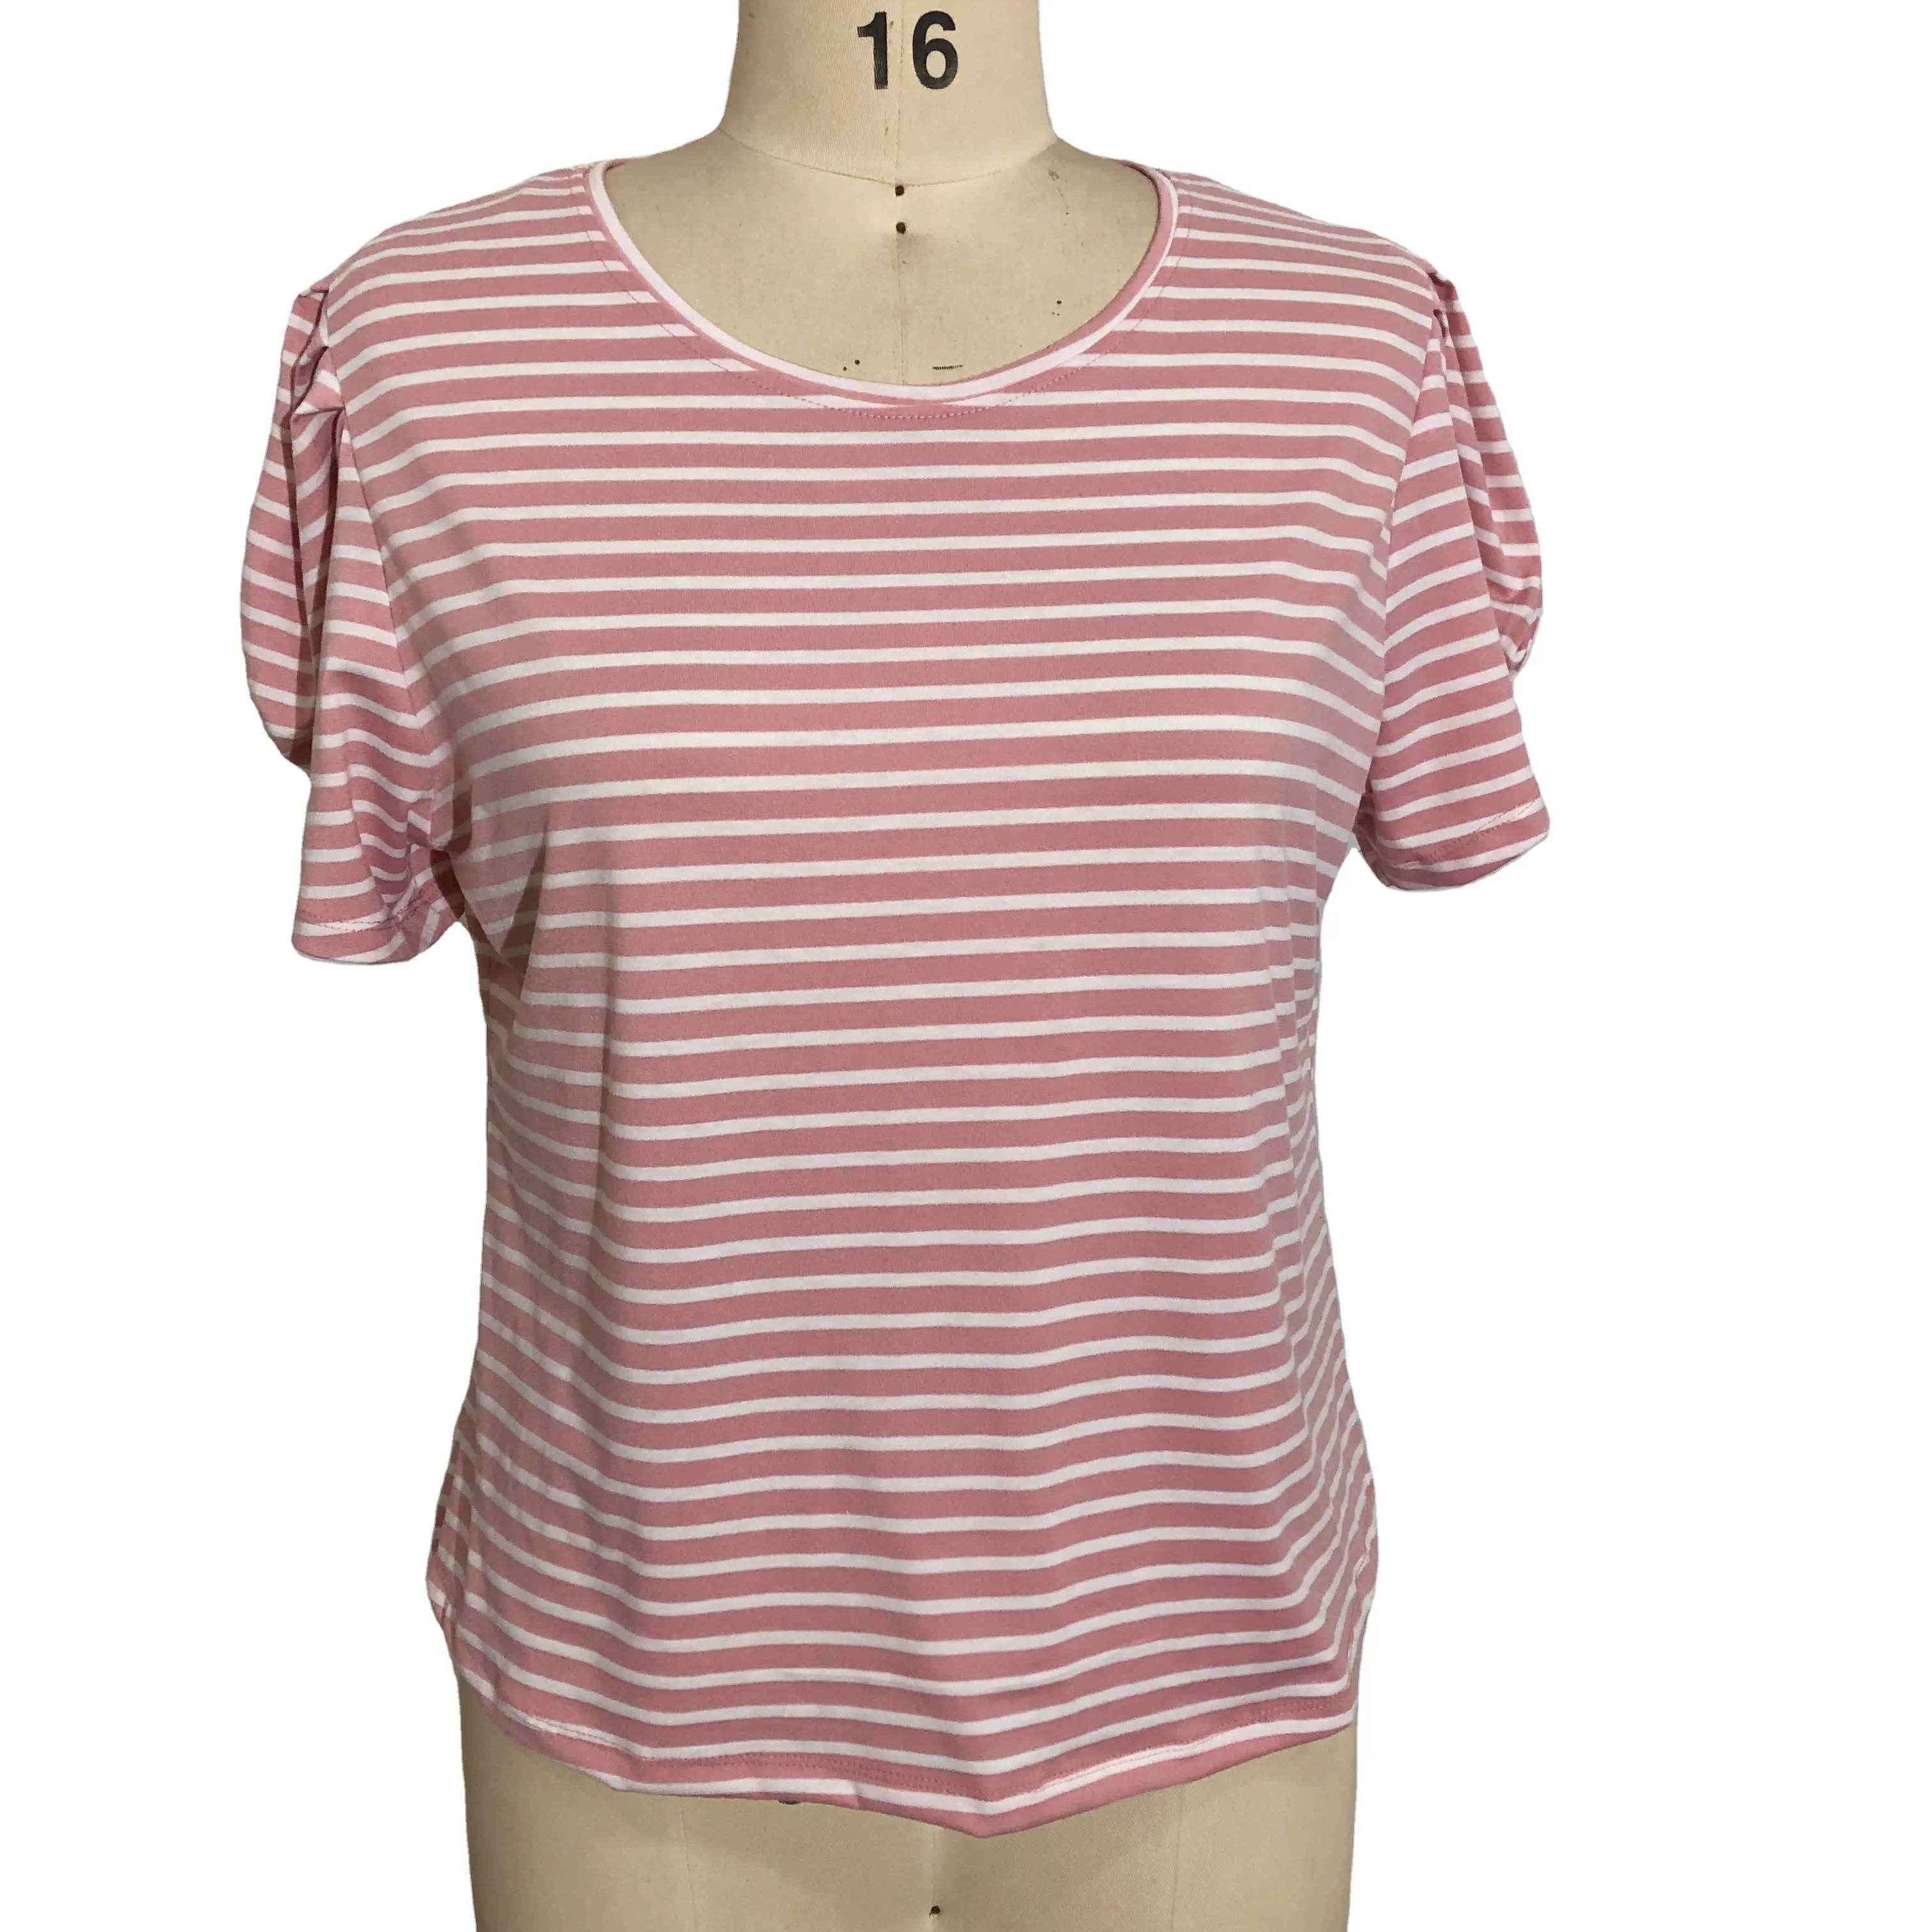 Ladies Cotton Tee Striped T-shirt Stretchy Knitted Women Puff Sleeve Short Sleeve Plus Size Pink And White Striped